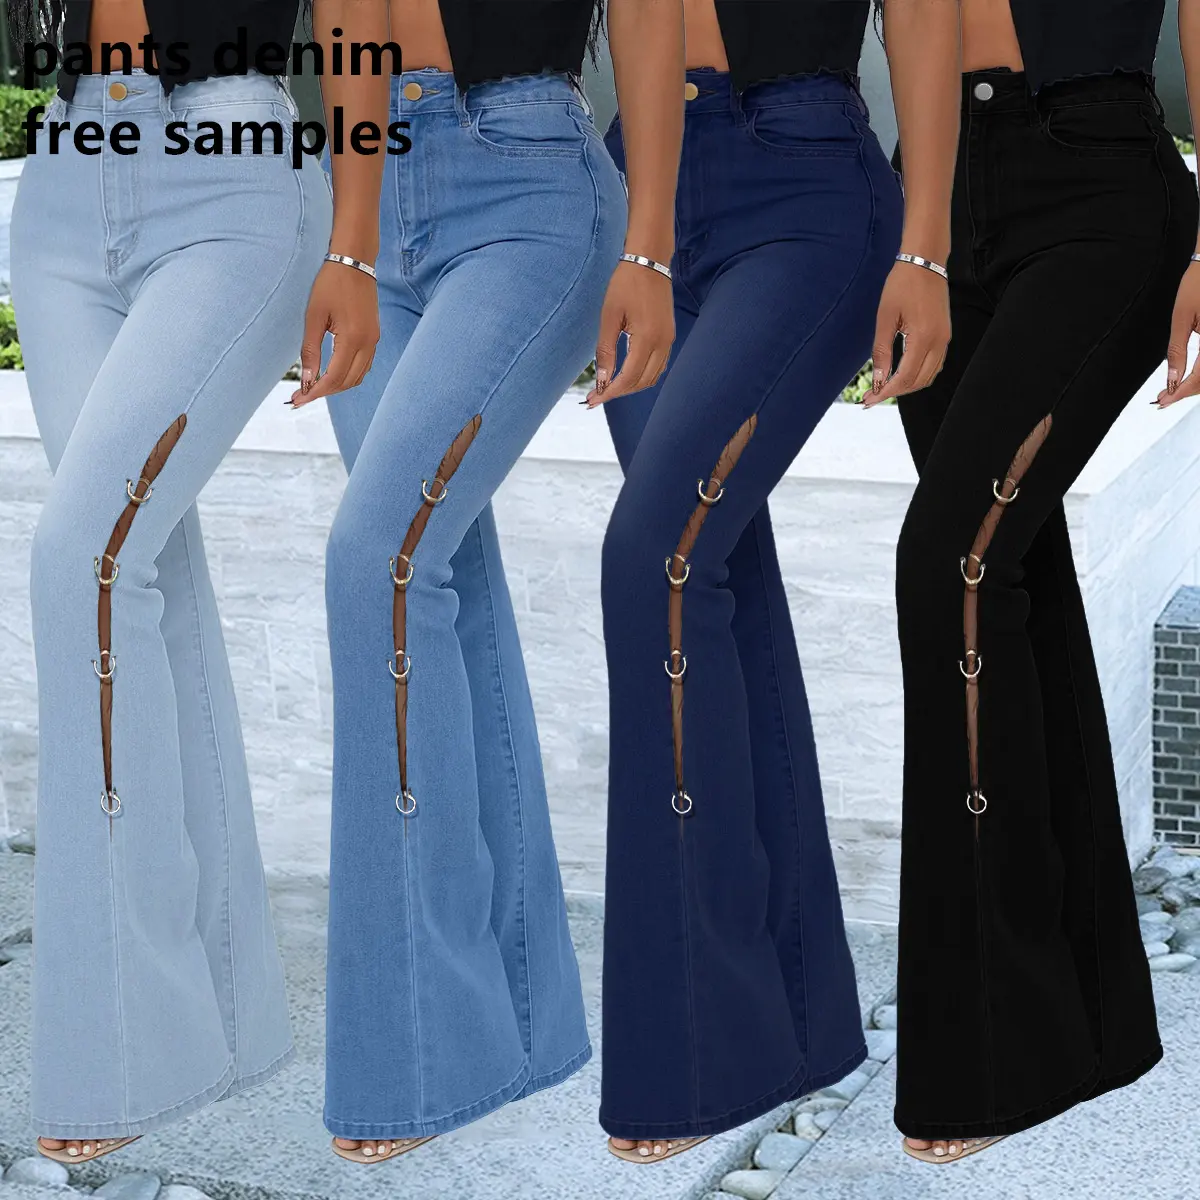 2022 Dropshipping Wholesale New style women fashion metal decoration flare women jeans pants denim for lady